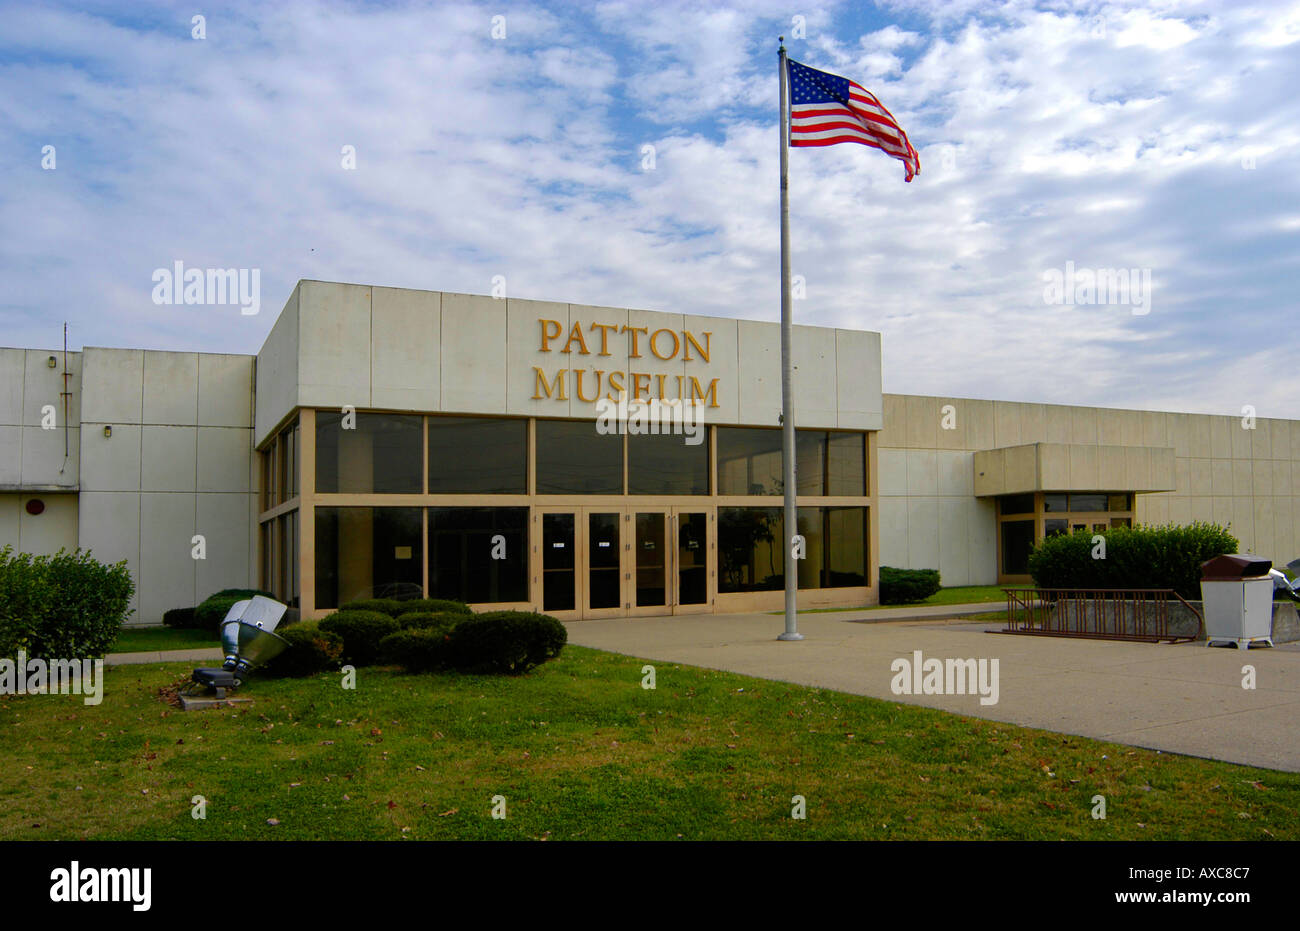 Generale George S Patton Armor Museum si trova a Fort Knox Army base a Fort Knox Kentucky Foto Stock